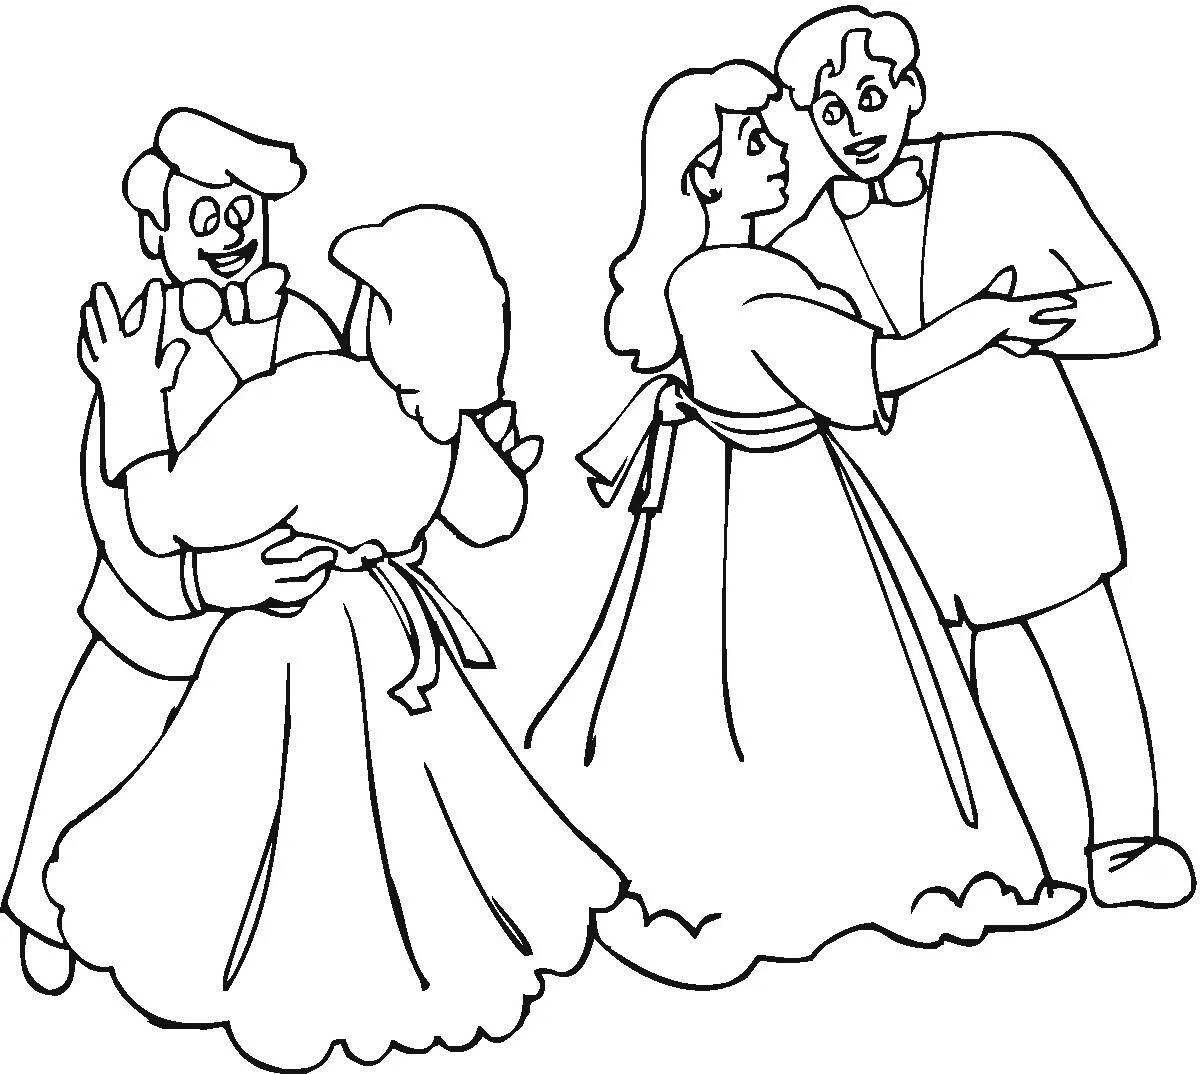 Coloring page playful polka dance